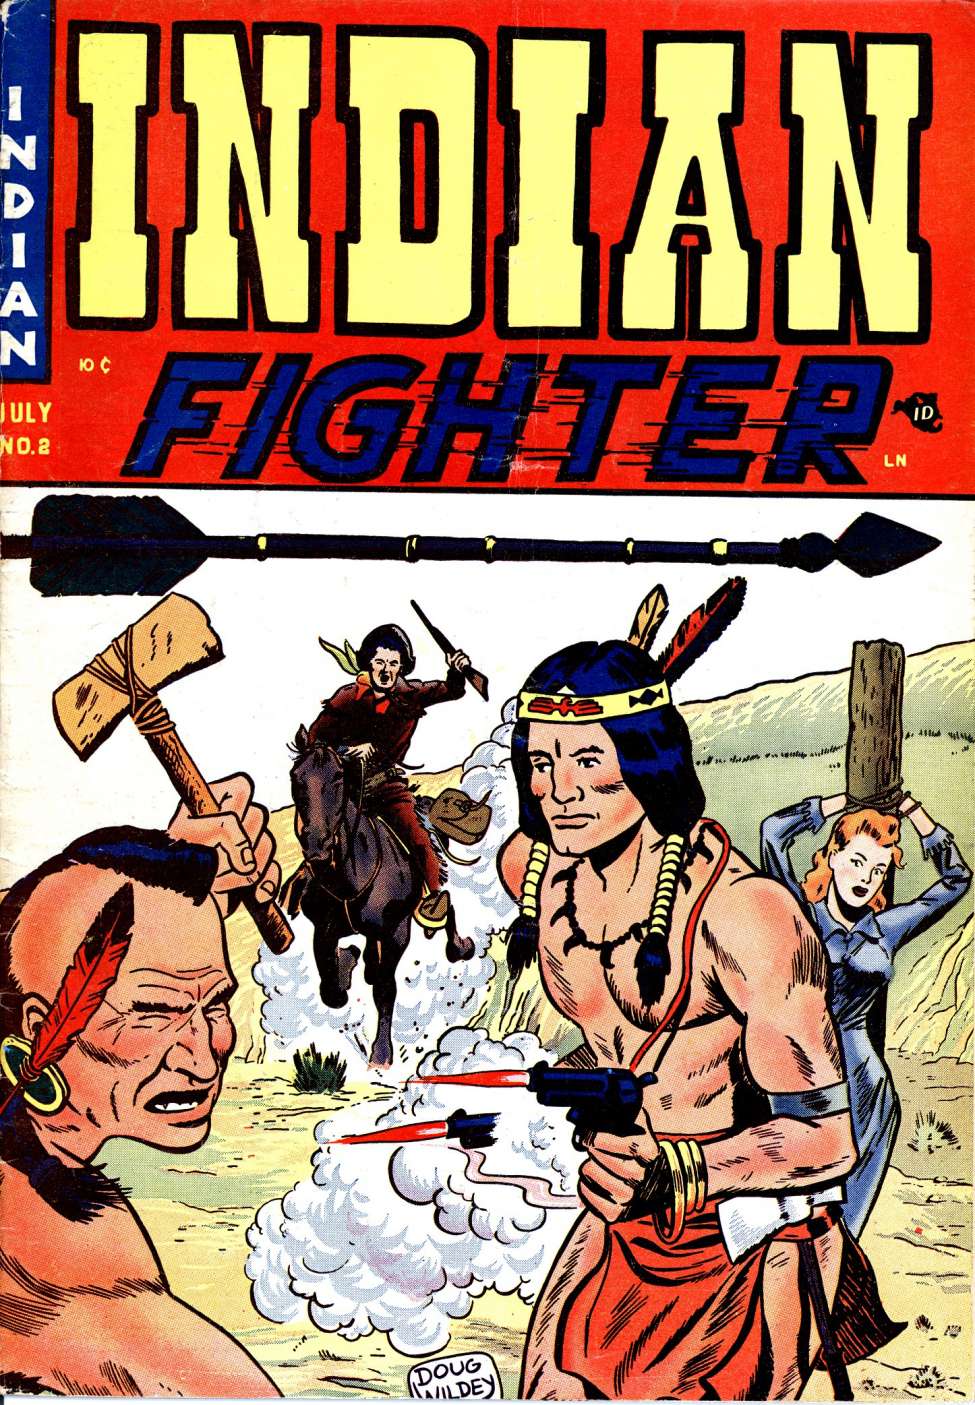 Book Cover For Indian Fighter 2